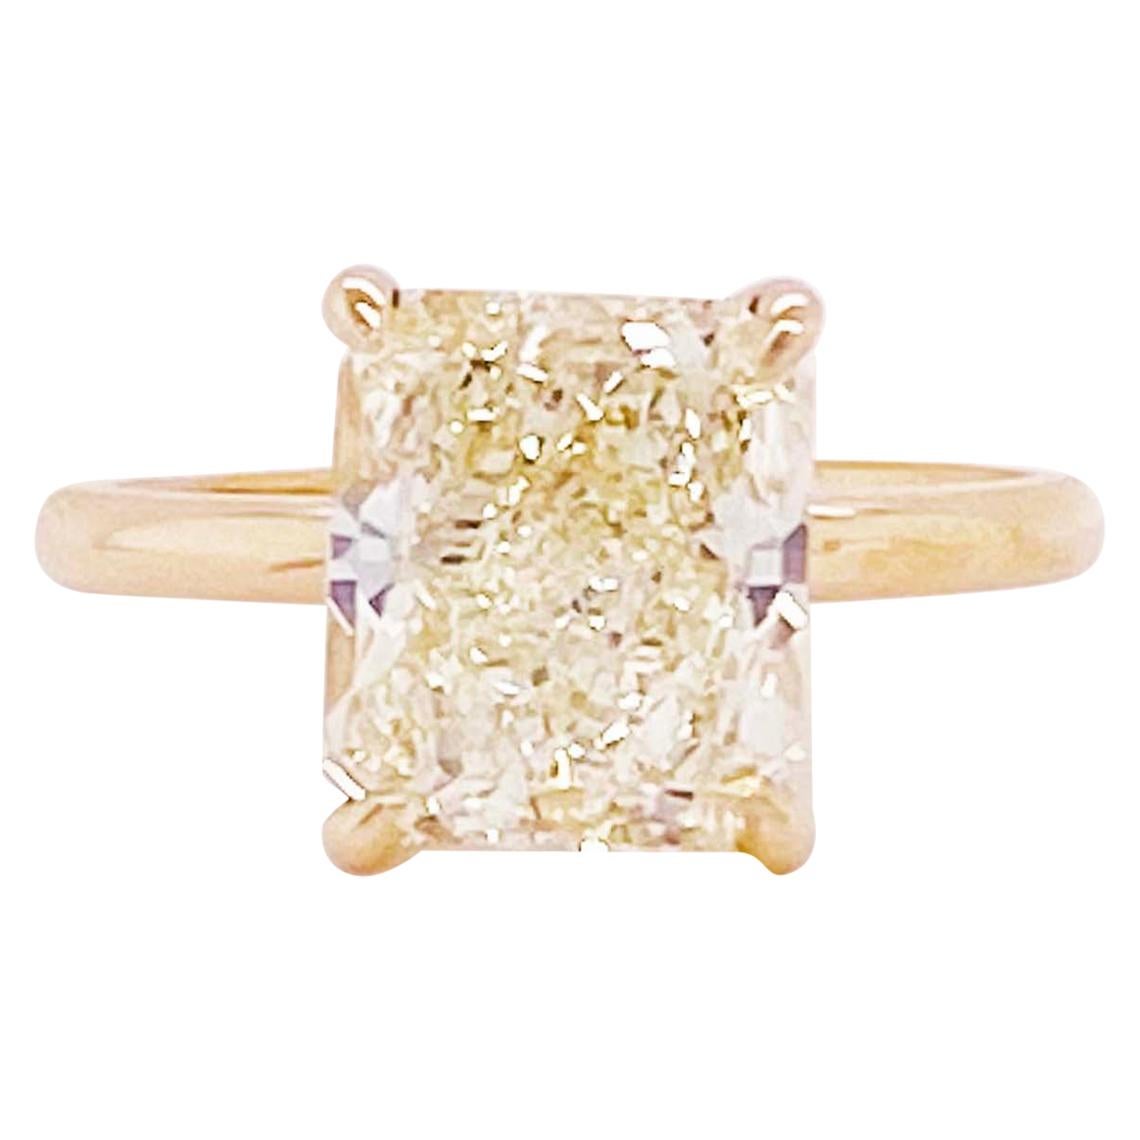 Made-to-Order GIA Radiant Diamond Solitaire Engagement Ring 14 Karat Yellow Gold